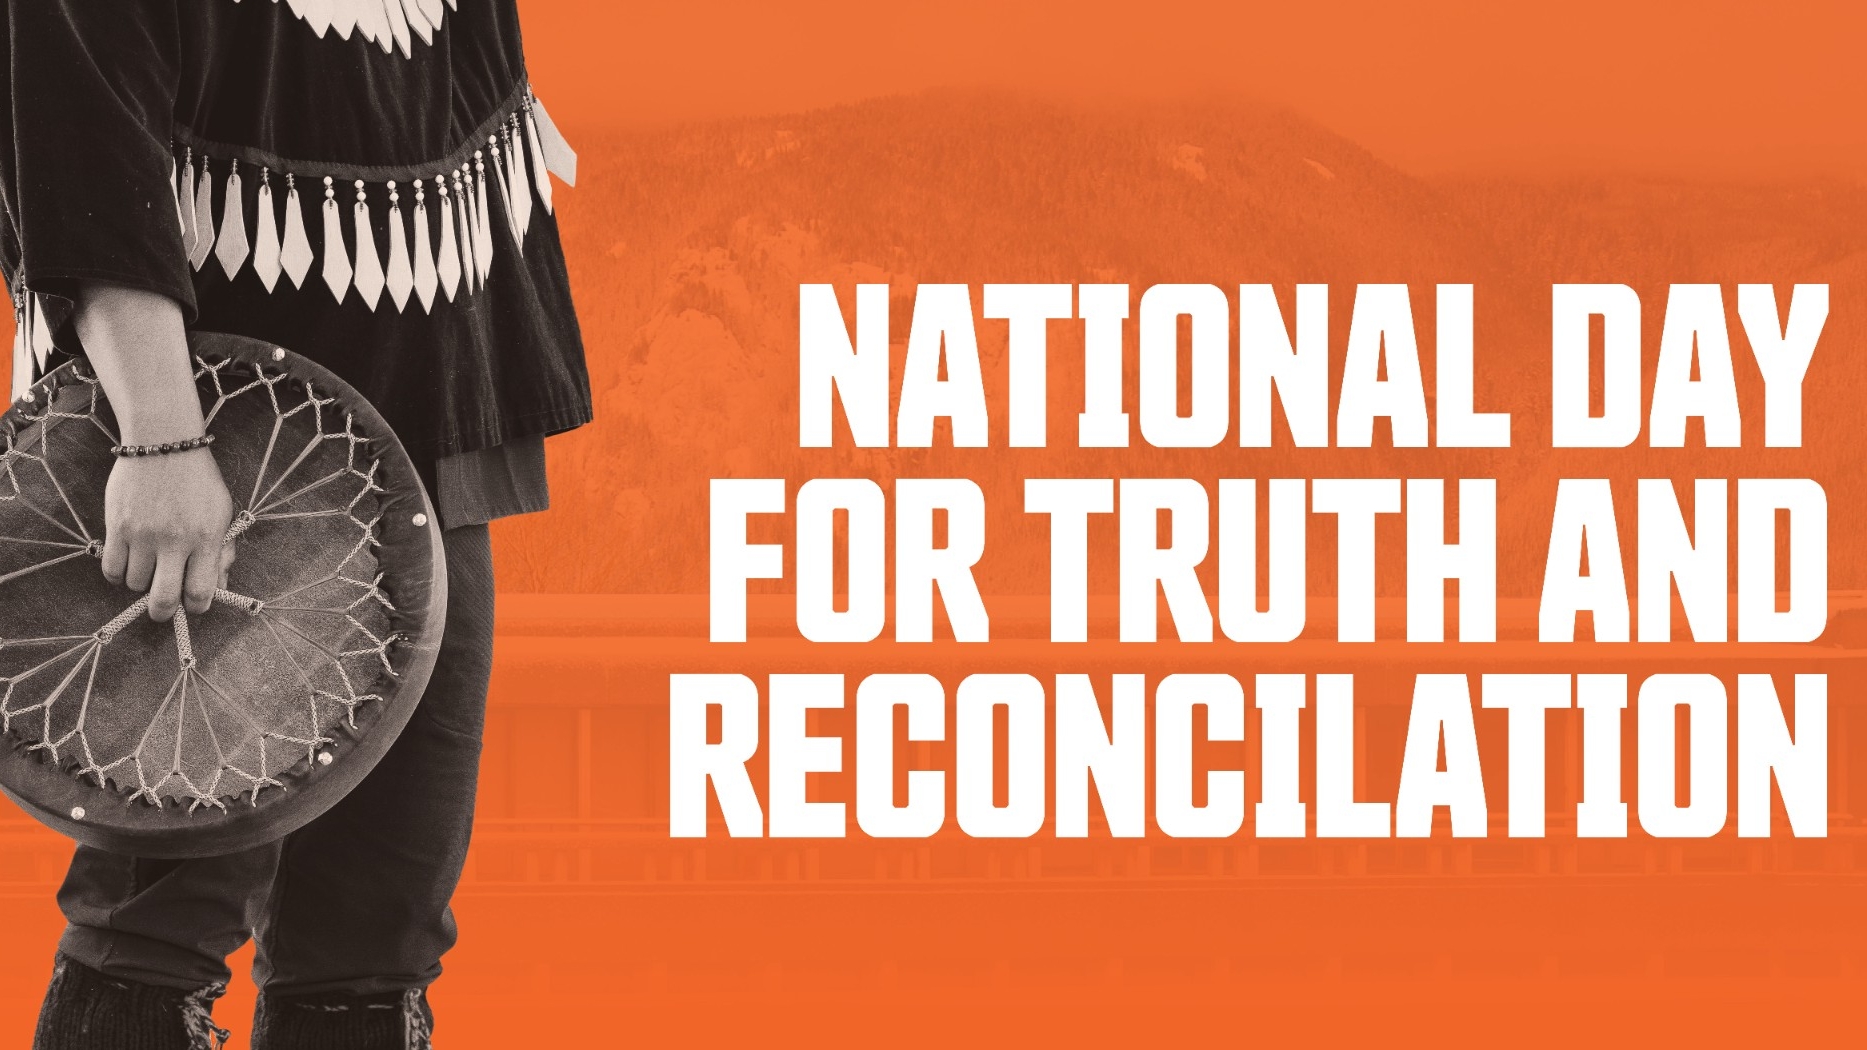 Cropped image of an Indigenous person holding a drum by their side on an orange background. Text overlay reads "NATIONAL DAY FOR TRUTH AND RECONCILIATION".